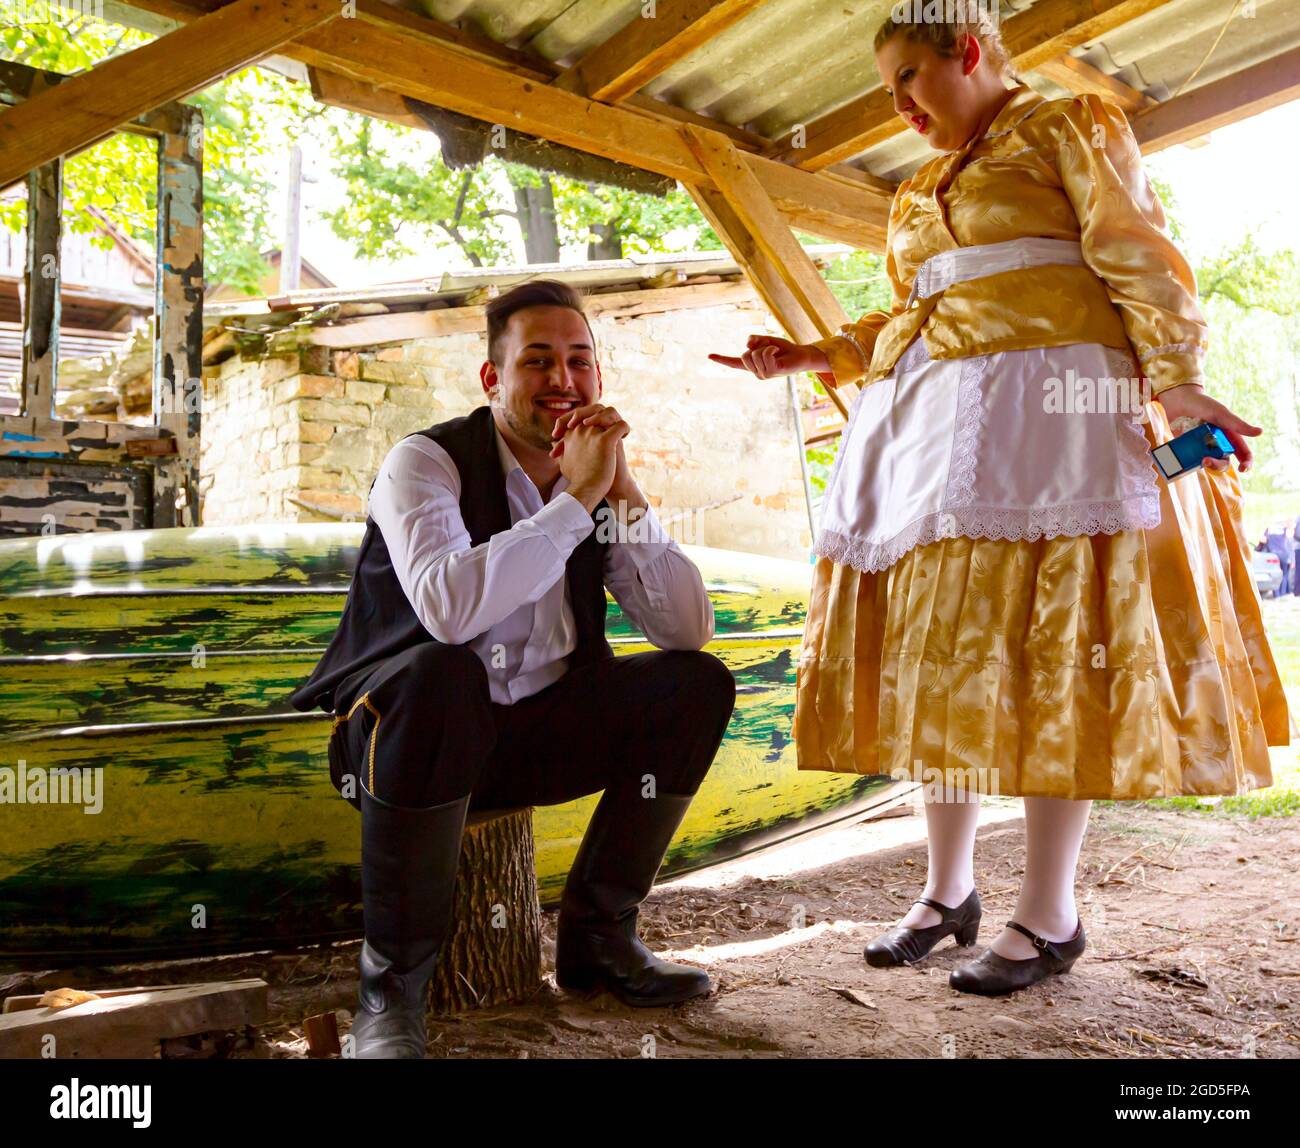 Ivanovo, Vojvodina, Serbia - April 17, 2016: Girl make jokes with young man who is sitting on wooden stump wearing a traditional folk costume in ancie Stock Photo